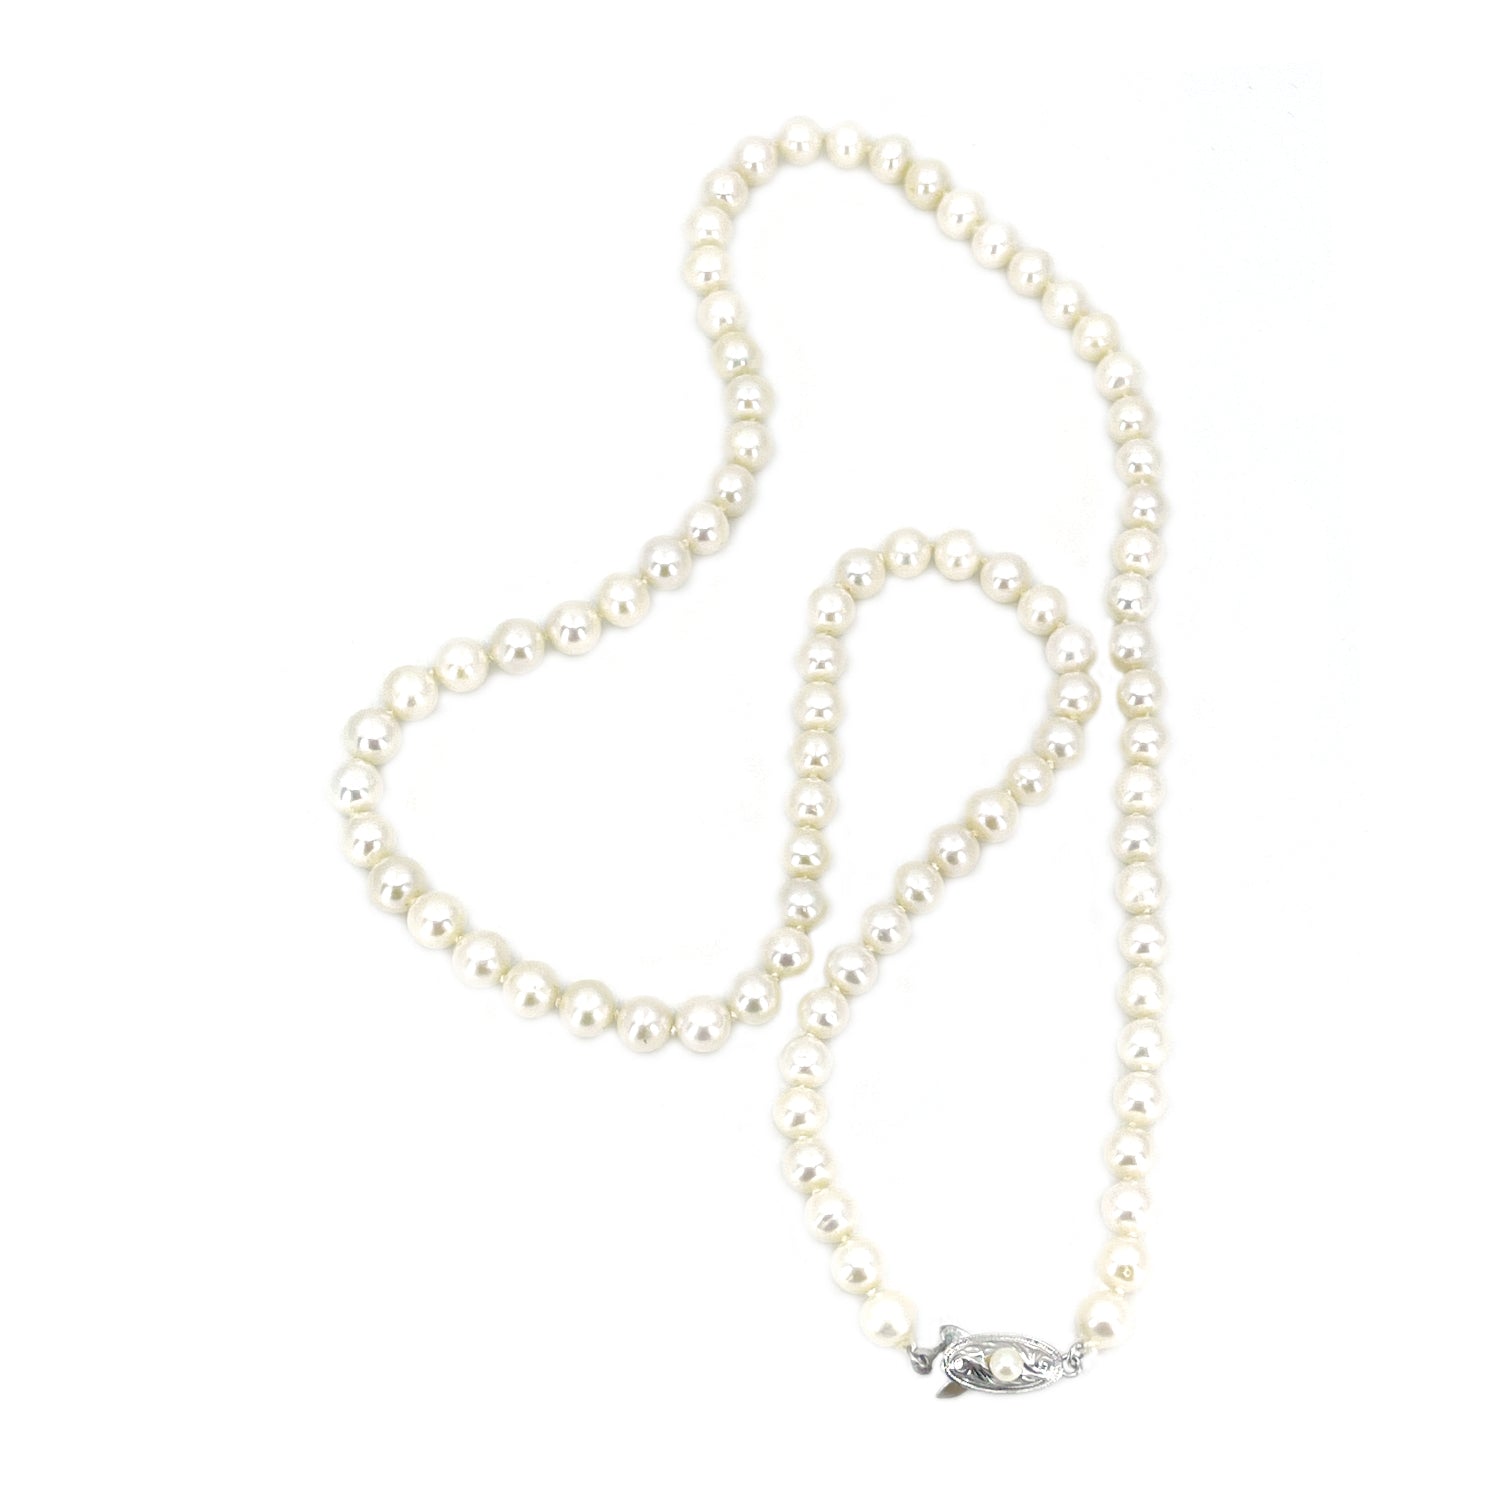 Retro Japanese Saltwater Cultured Akoya Pearl Graduated Necklace - Sterling Silver 25 Inch